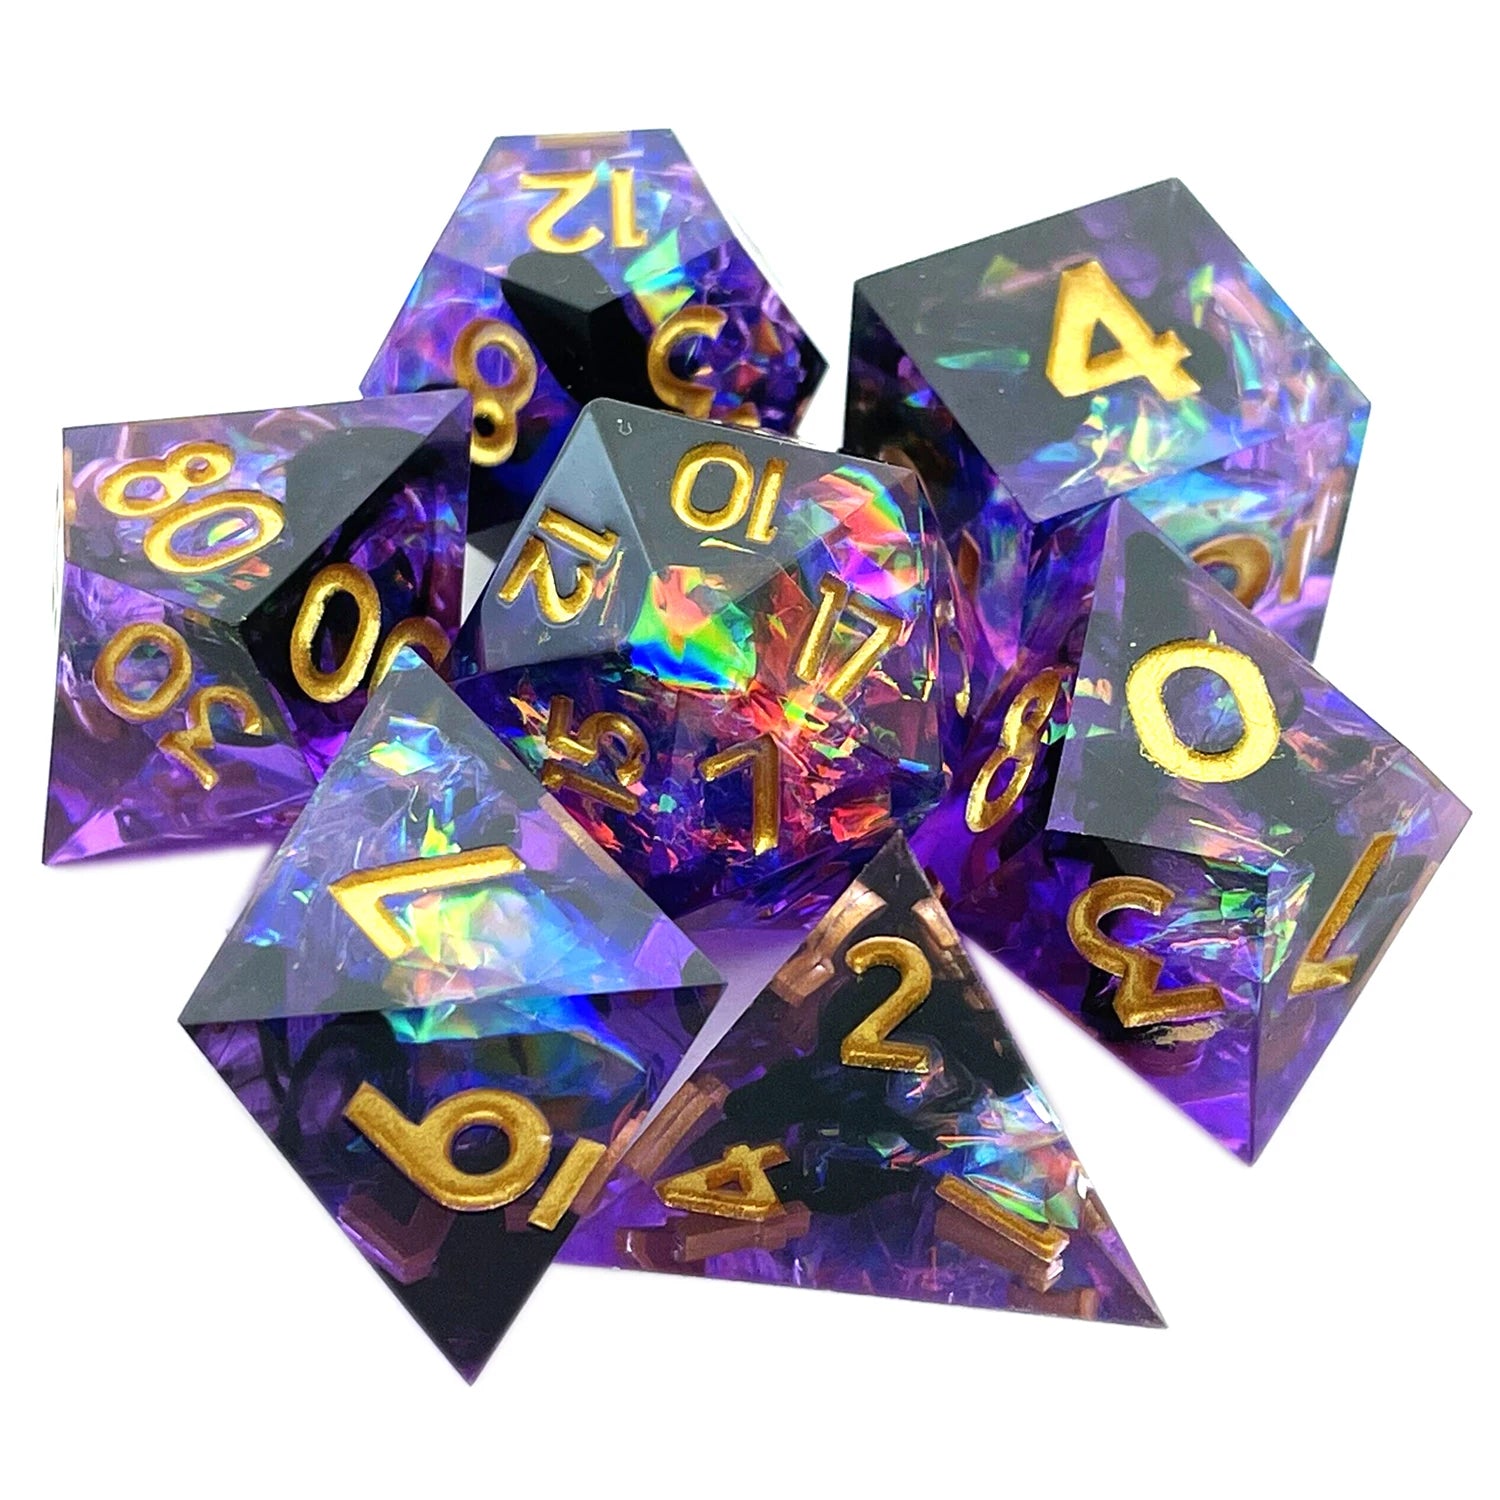 2023 Resin Dice 7PCs Dnd Set Solid Polyhedral D&D Dice DND For Role Playing Rpg Rol Pathfinder Board Game Dragon Scale Gifts